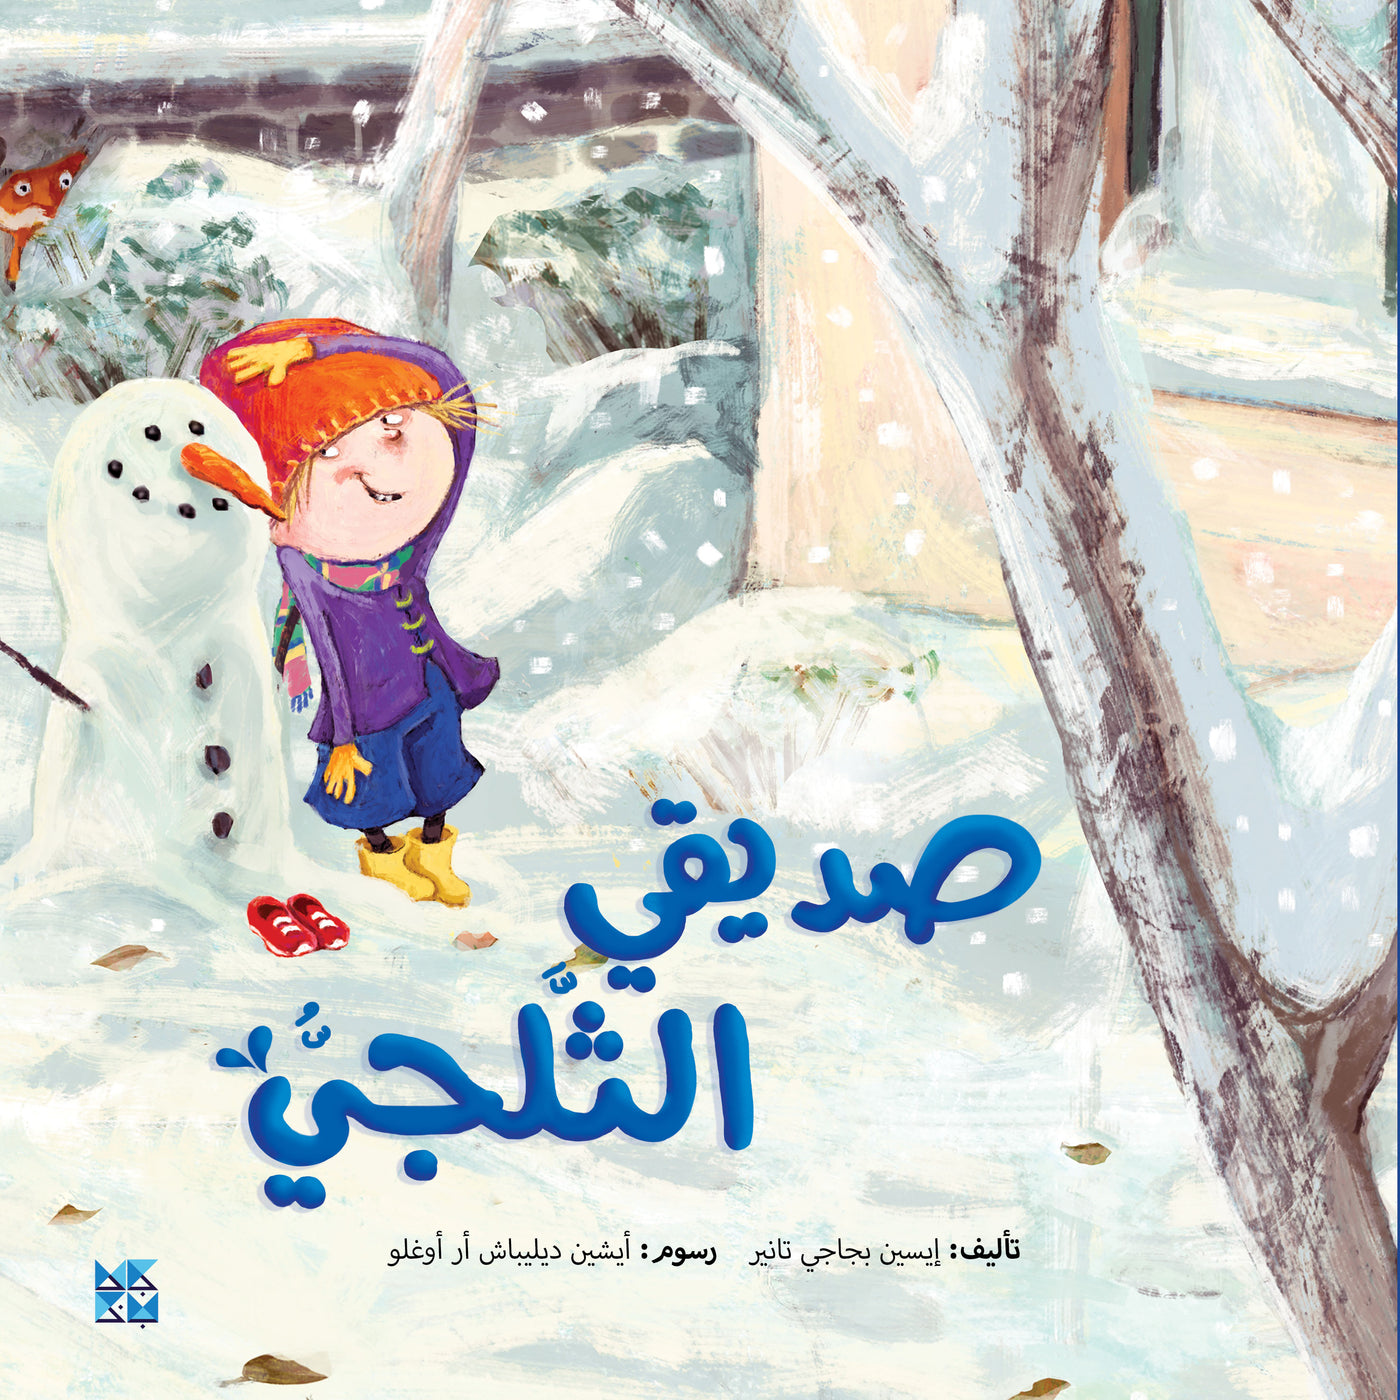 All About Kids Series: My Snow Friend - Book Cover